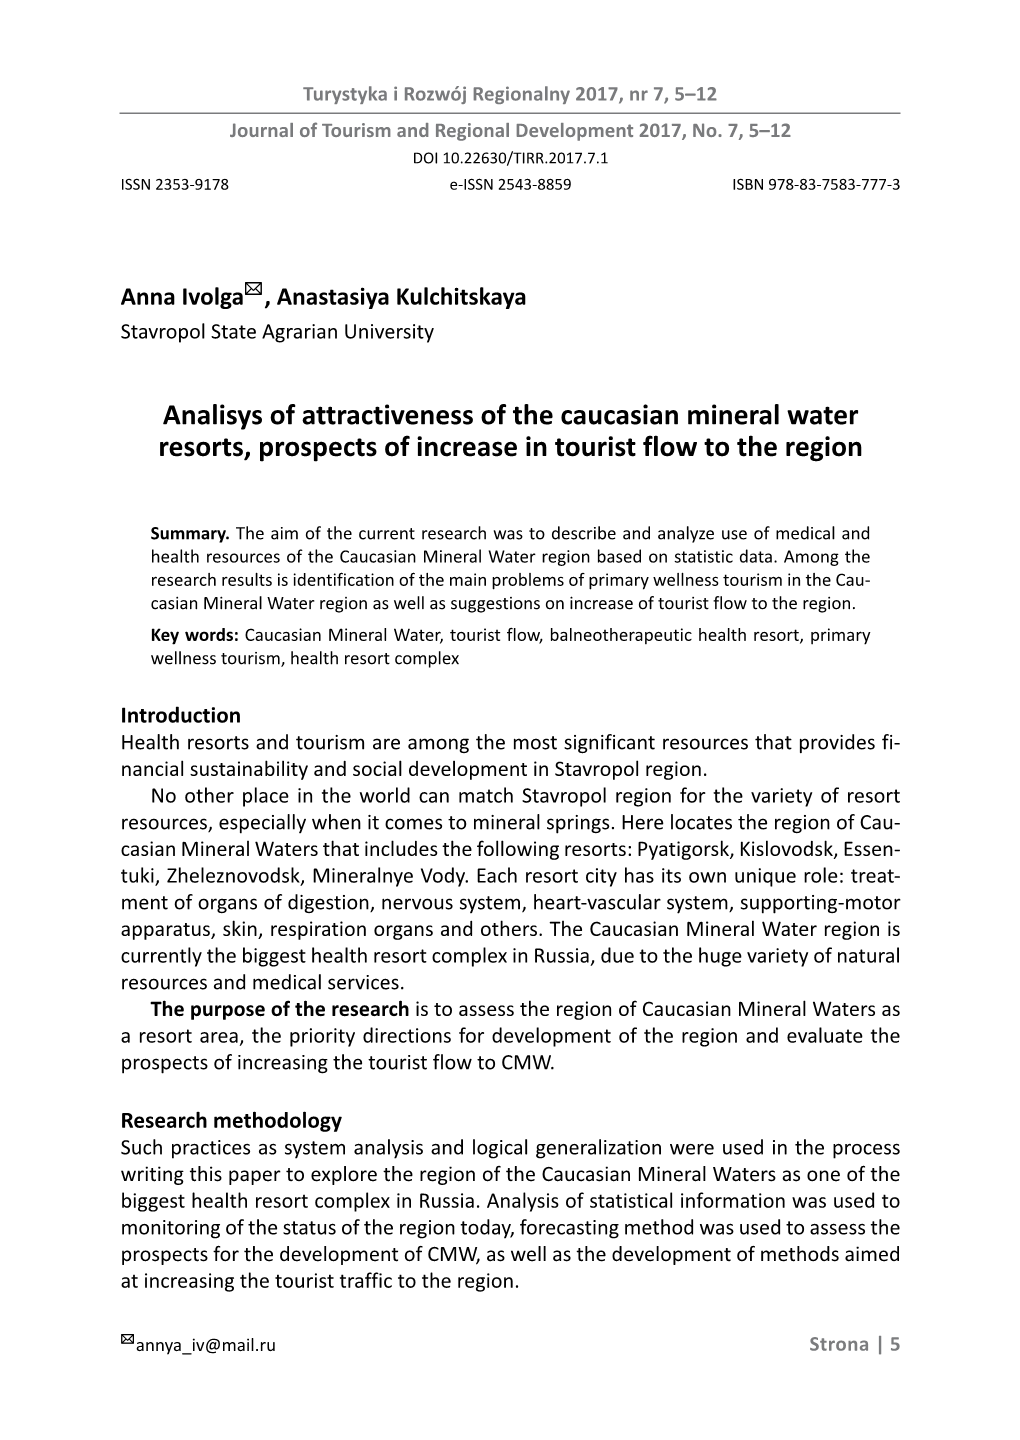 Analisys of Attractiveness of the Caucasian Mineral Water Resorts, Prospects of Increase in Tourist Flow to the Region